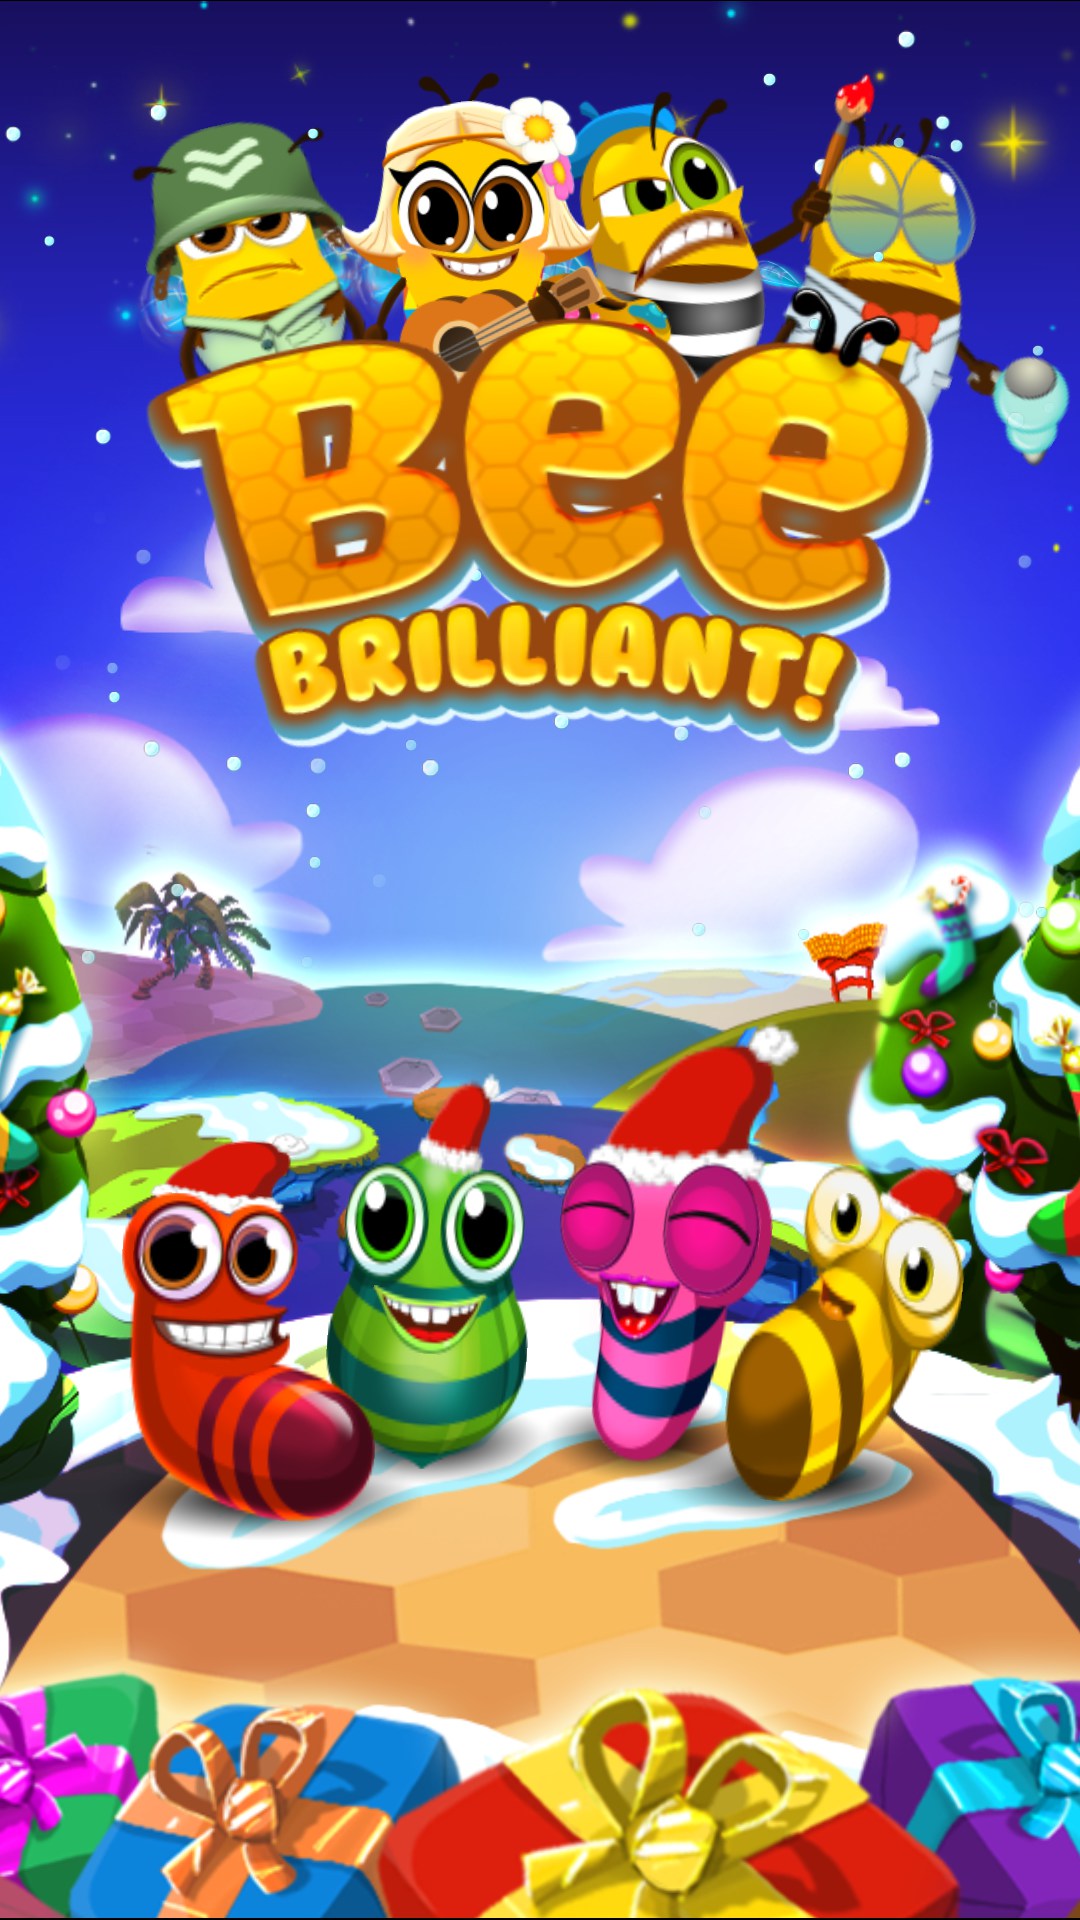 Bee 2.4.9 download free